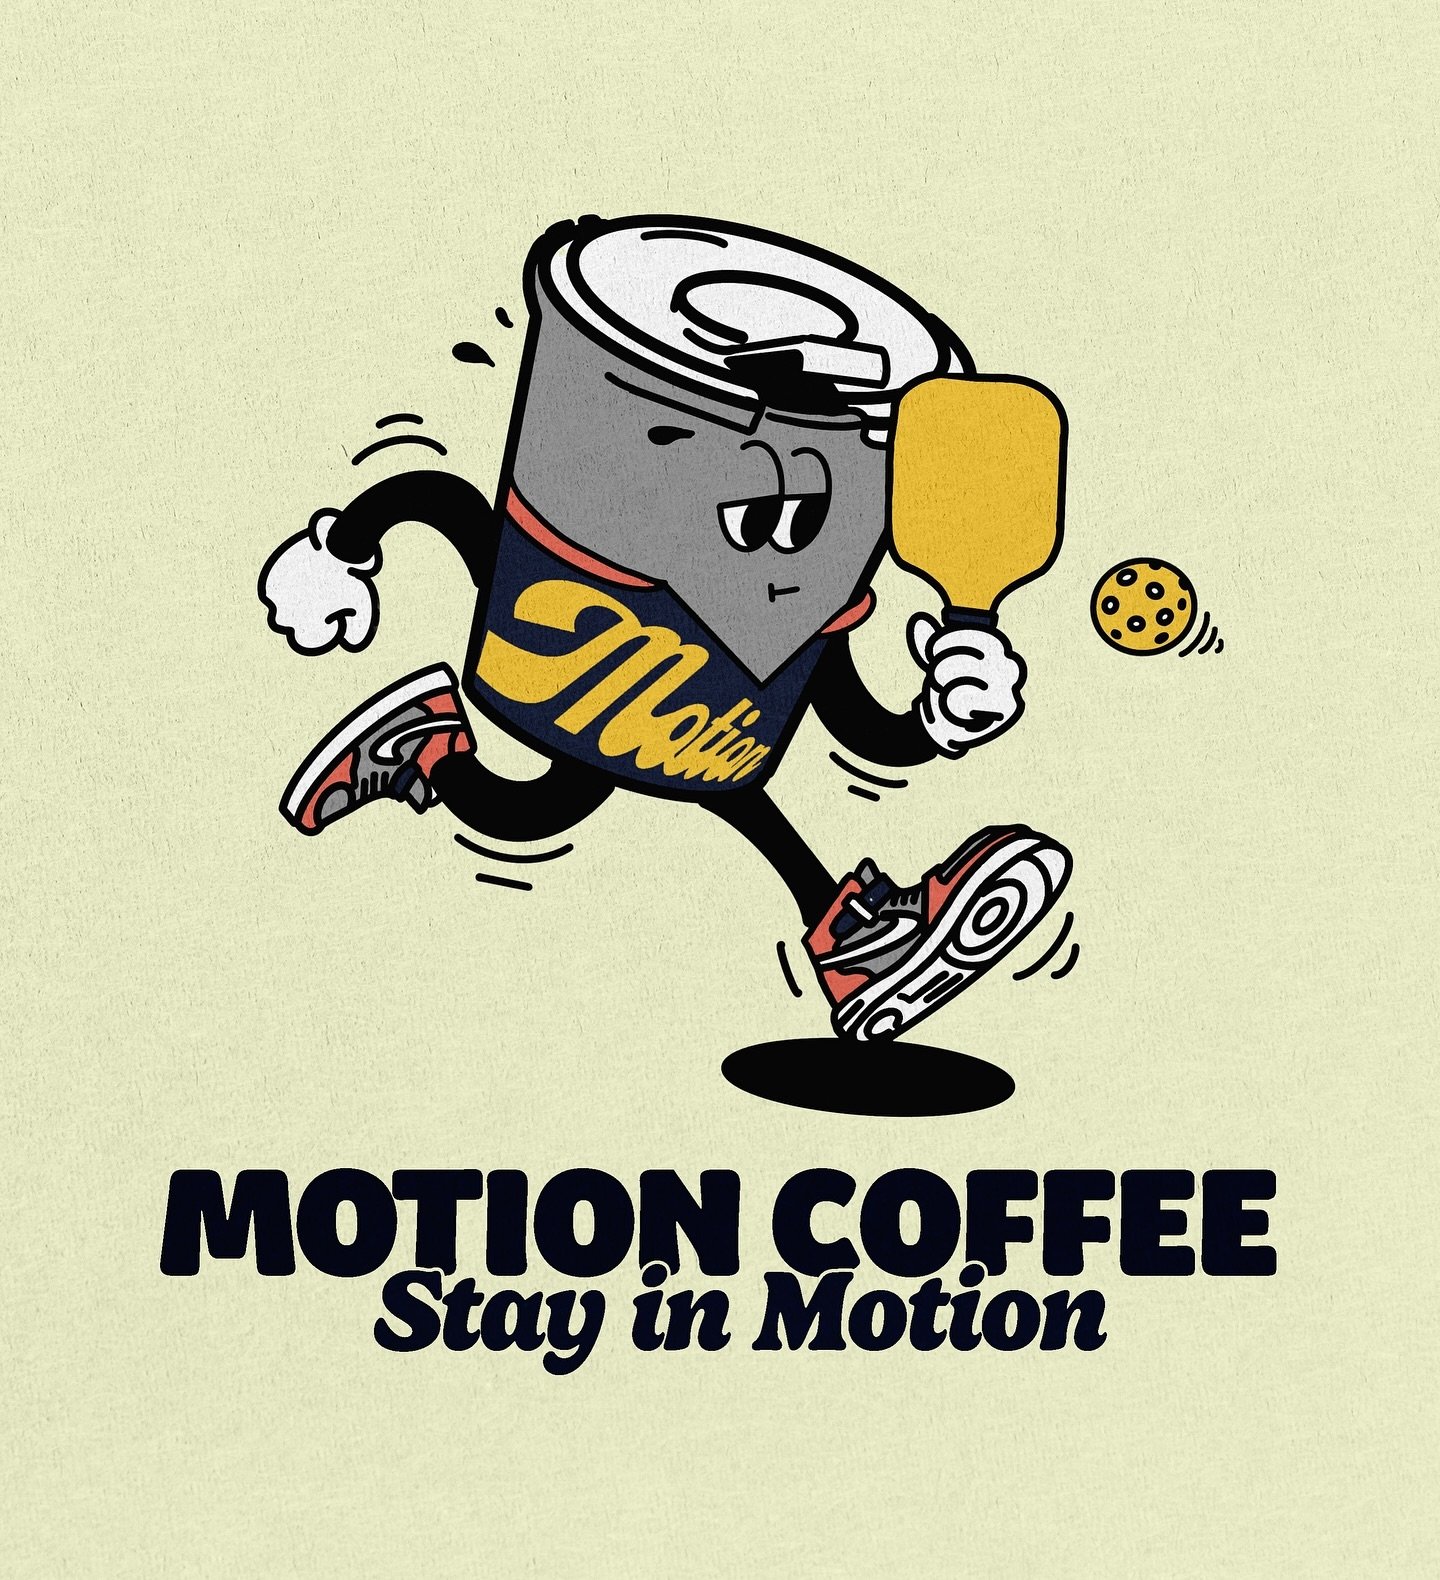 MOTION COFFEE PICKLEBALL TOURNAMENT!!
We are stoked to announce we will be hosting our 1st pickleball tournament Saturday, May 25th at the Four Seasons Pickleball courts. There will be an exclusive, small run of merch, crazy coffee, and sponsored pri